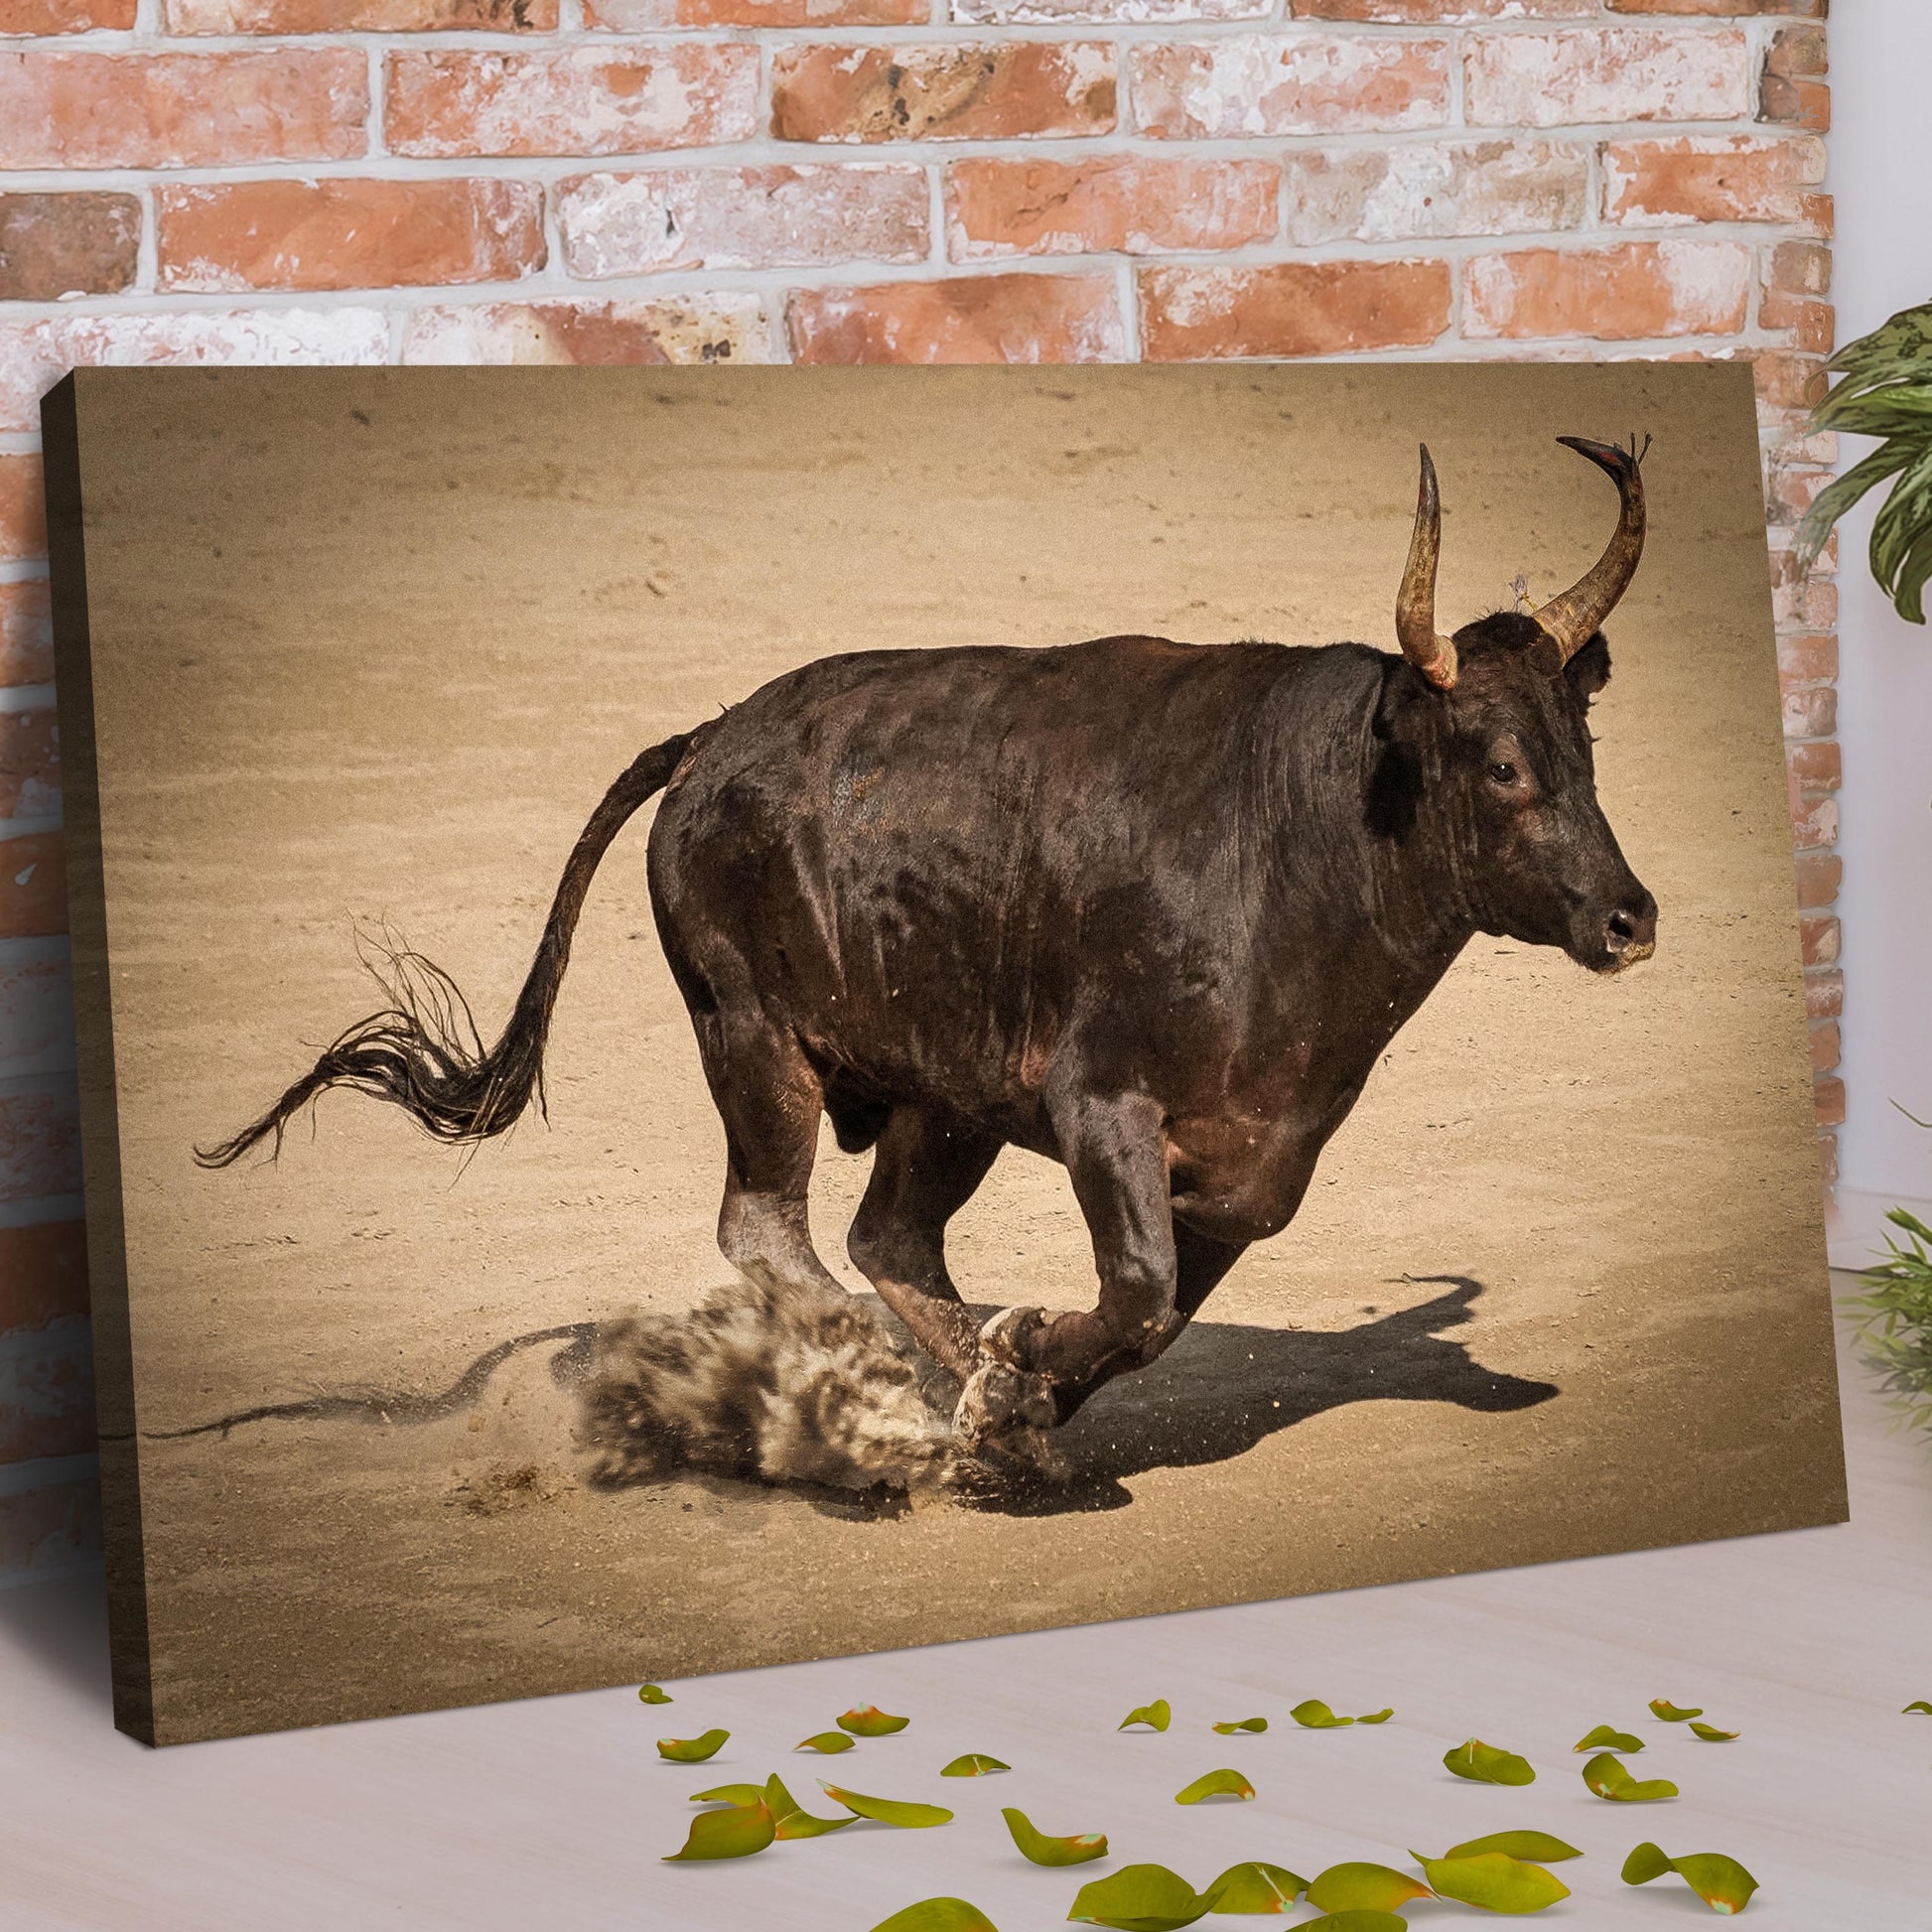 Charging Bull Canvas Wall Art Style 2 - Image by Tailored Canvases